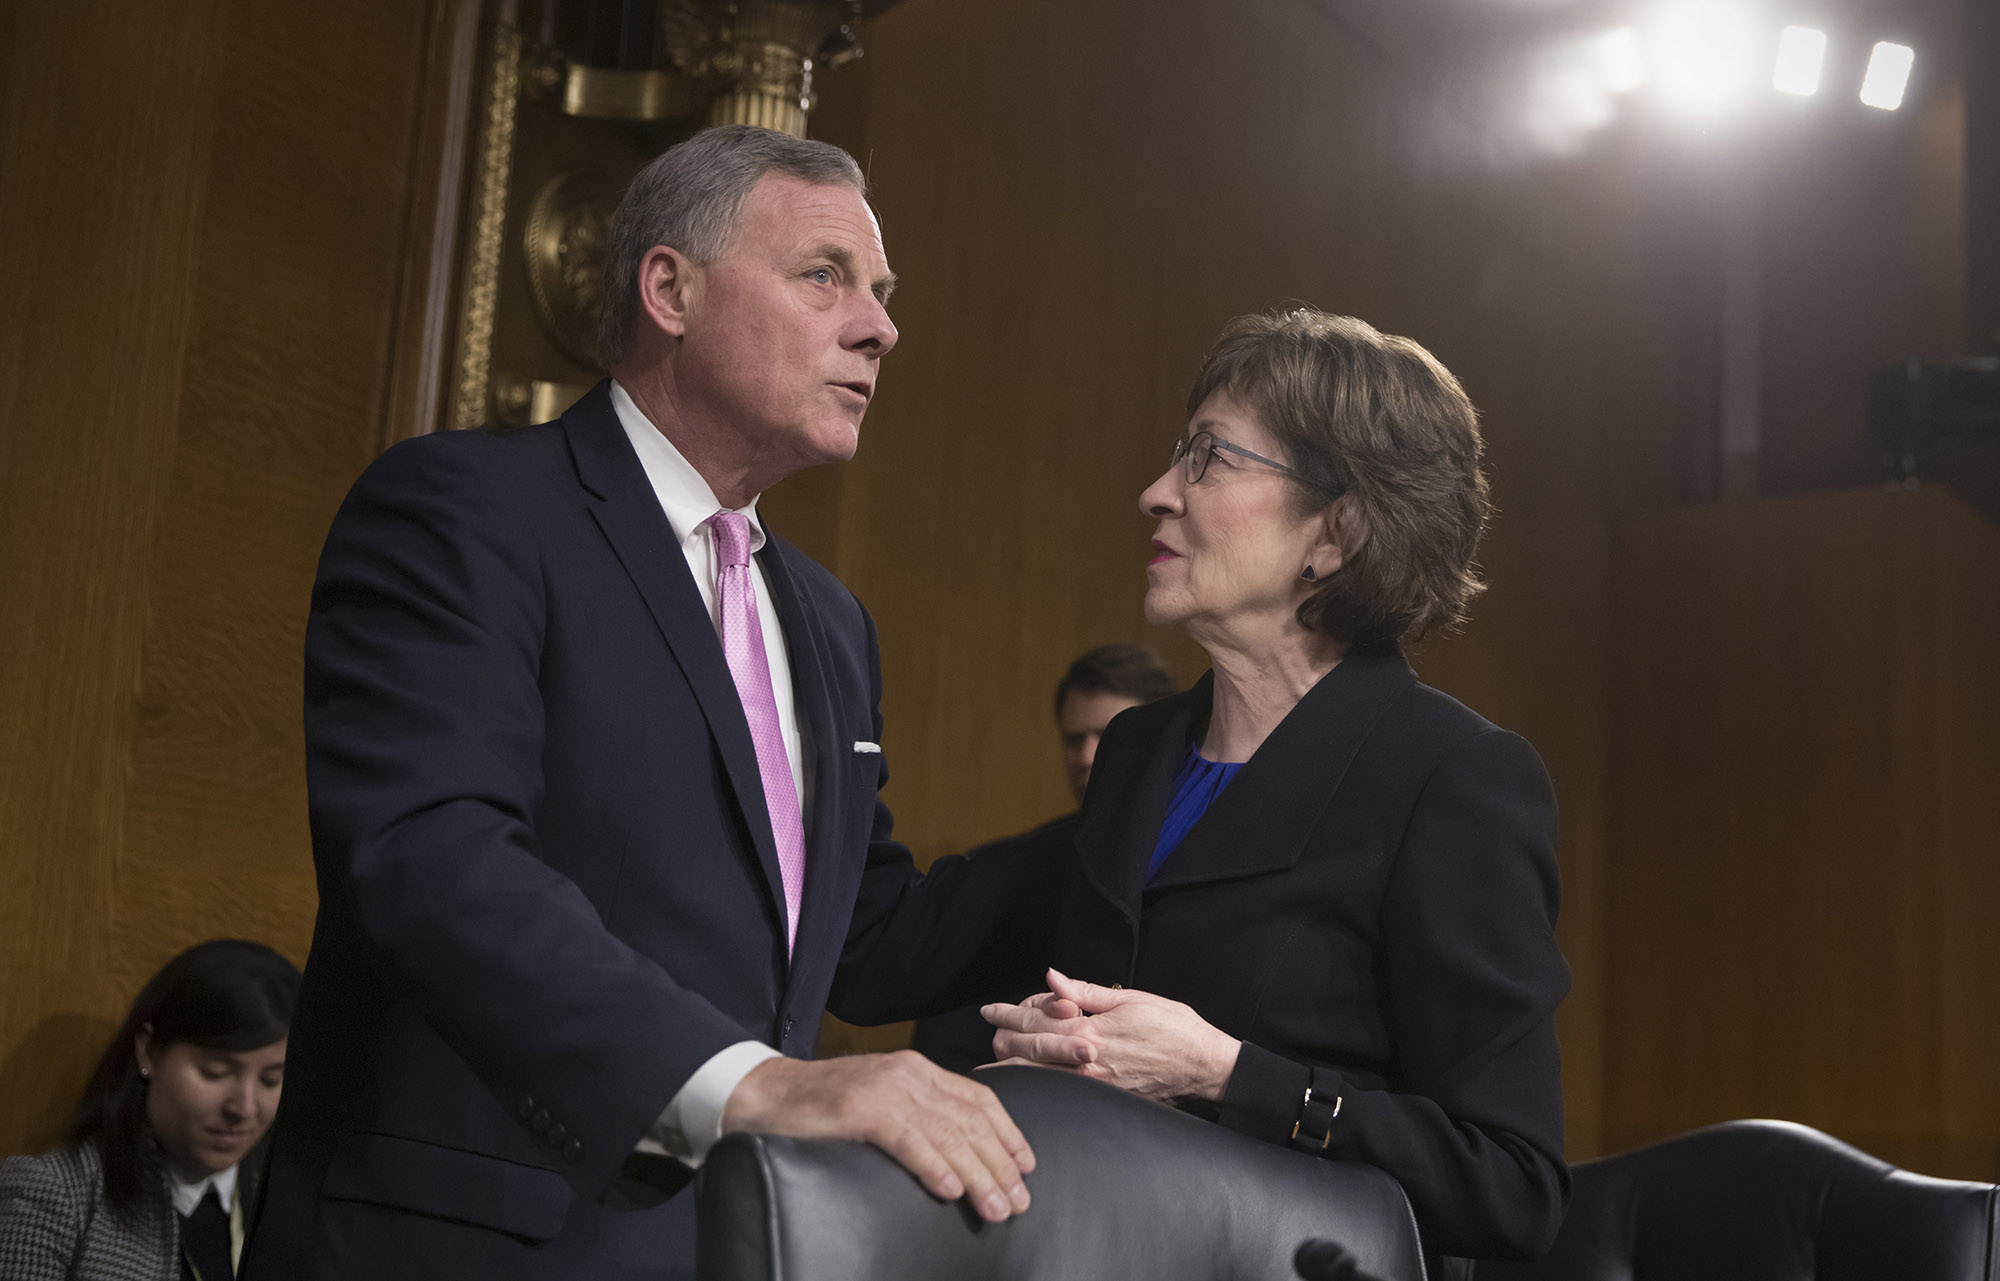 Sen. Richard Burr, R-N.C., right, chairman of the Senate Select Committee on Intelligence, confers with Sen. Susan Collins, R-Maine, at the start of a hearing to examine problems and practices of issuing security clearances to government employees, at the Capitol in Washington, Wednesday, March 7, 2018. (AP Photo/J. Scott Applewhite)